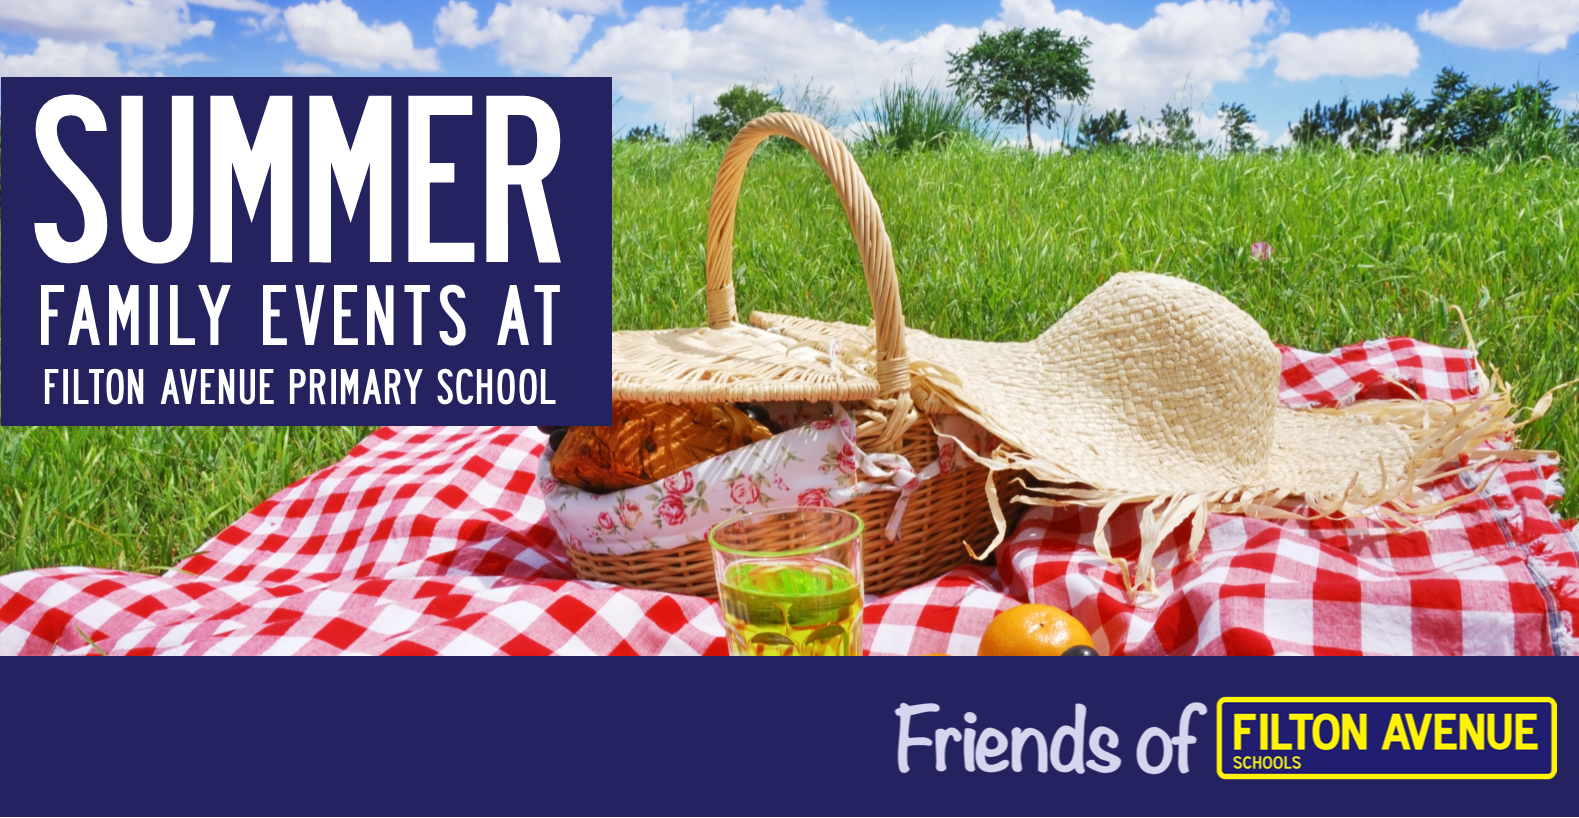 Summer Events Banner - Summer Family Events